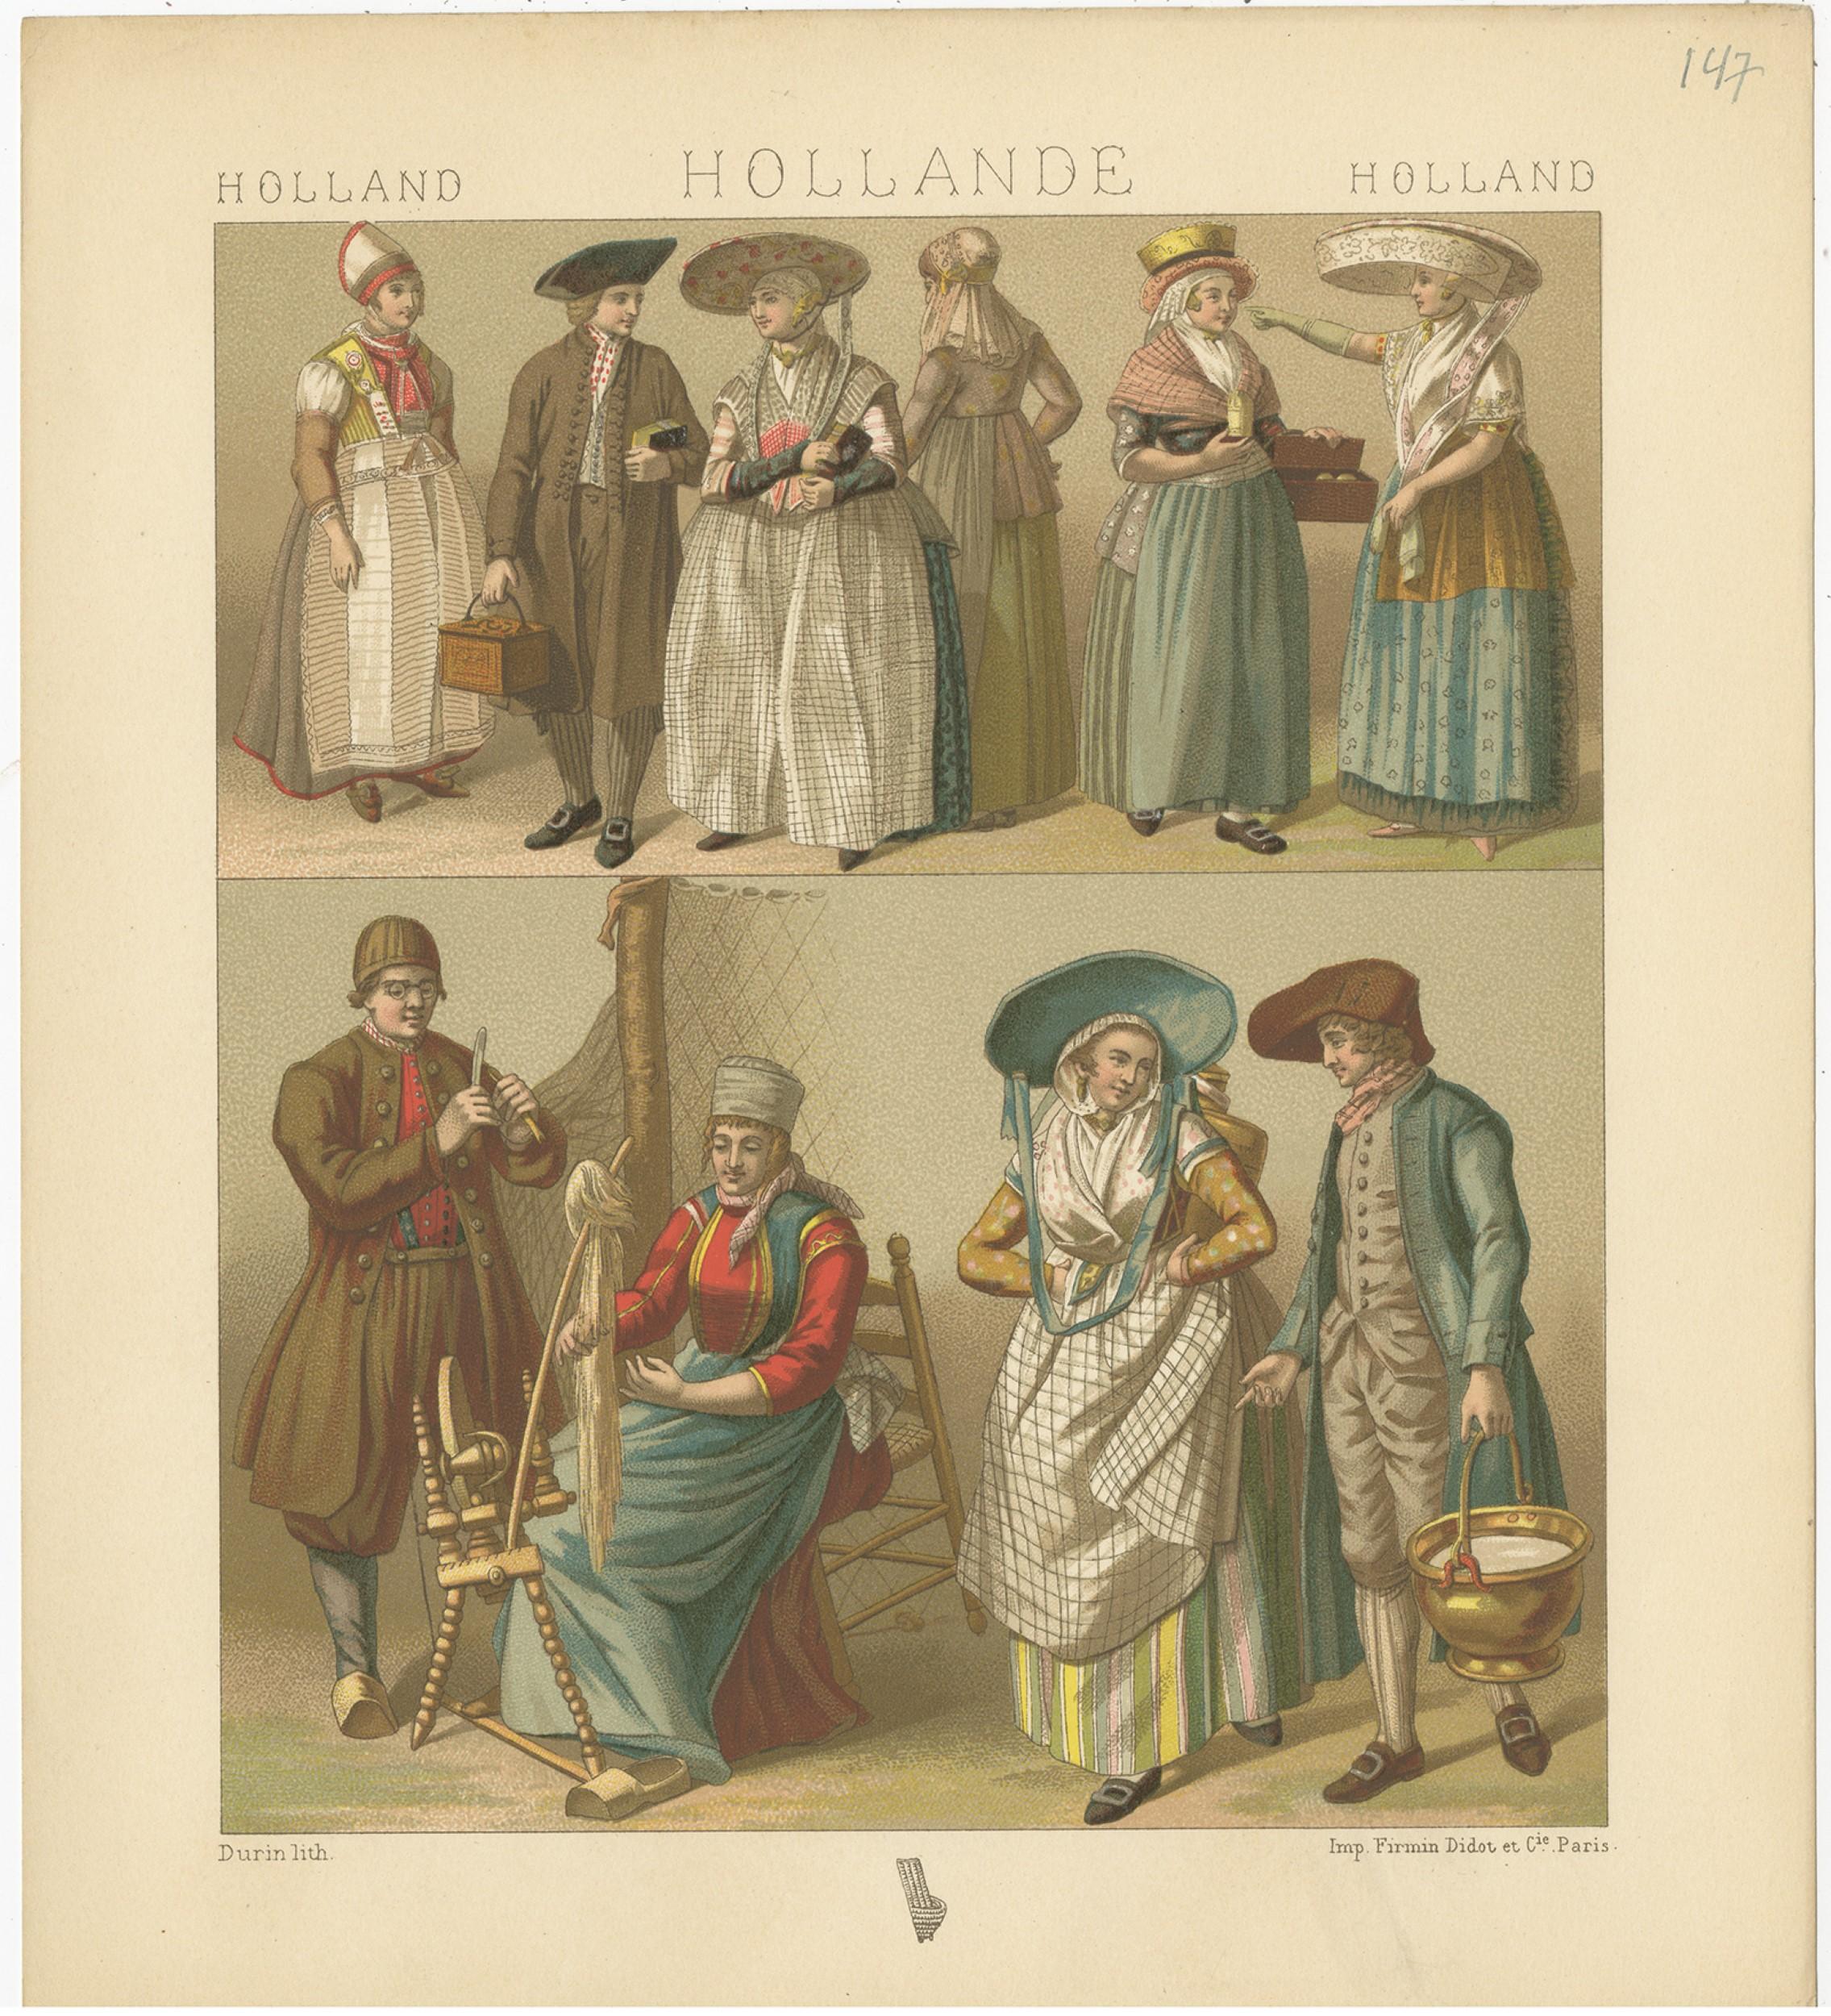 Antique print titled 'Holland - Hollande - Holland'. Chromolithograph of Holland outfits. This print originates from 'Le Costume Historique' by M.A. Racinet. Published, circa 1880.

   